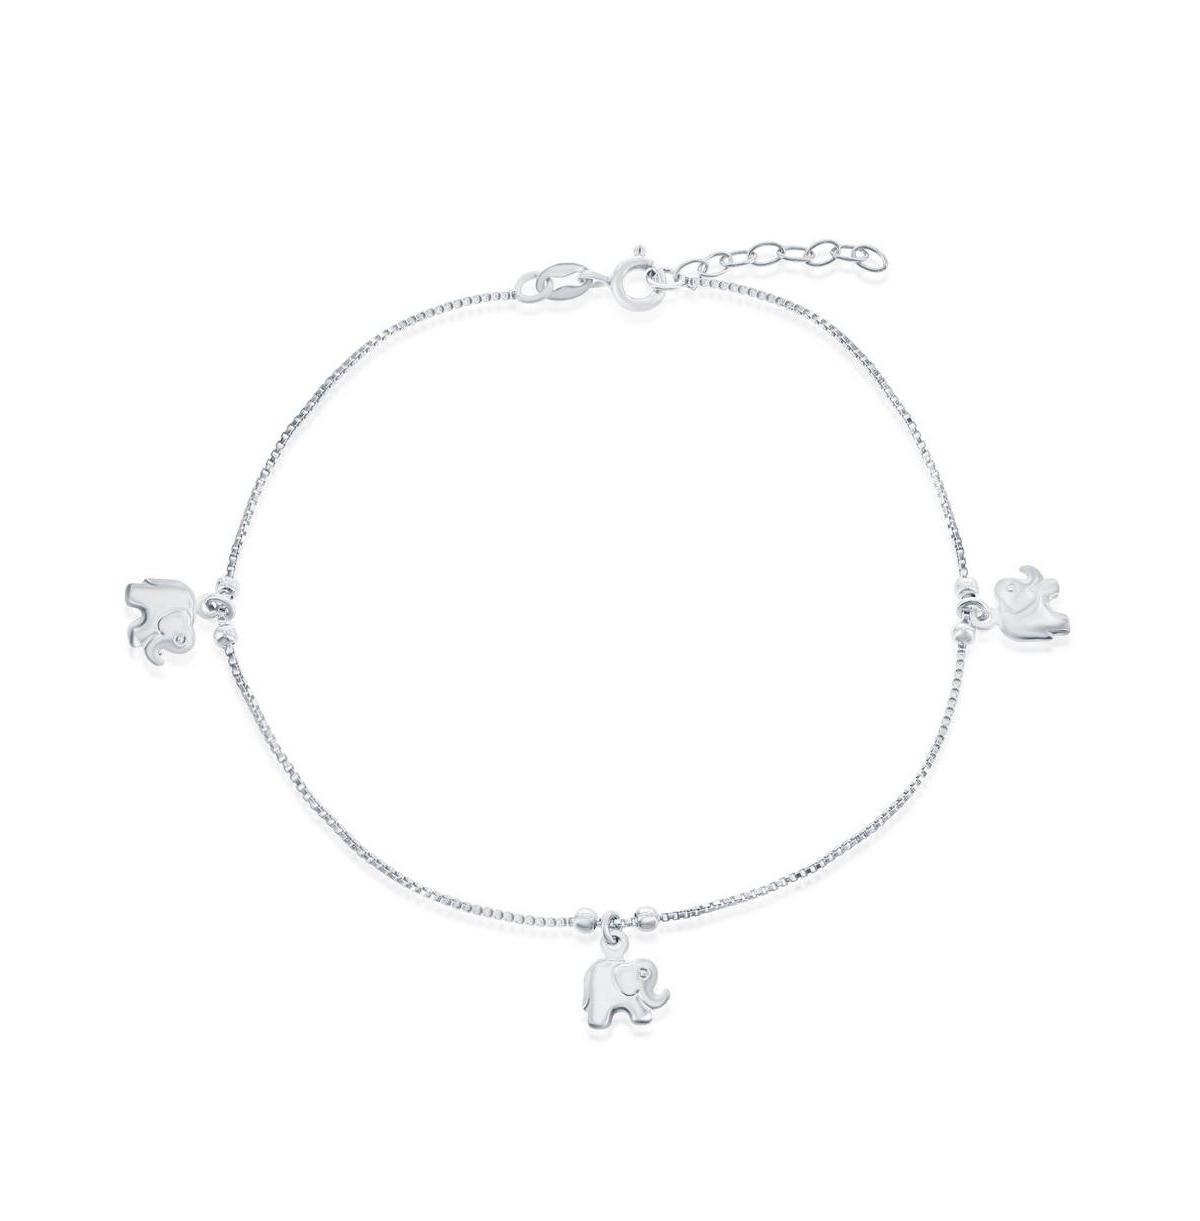 Sterling Silver Beads with Elephant Charms Anklet Bracelet - Silver